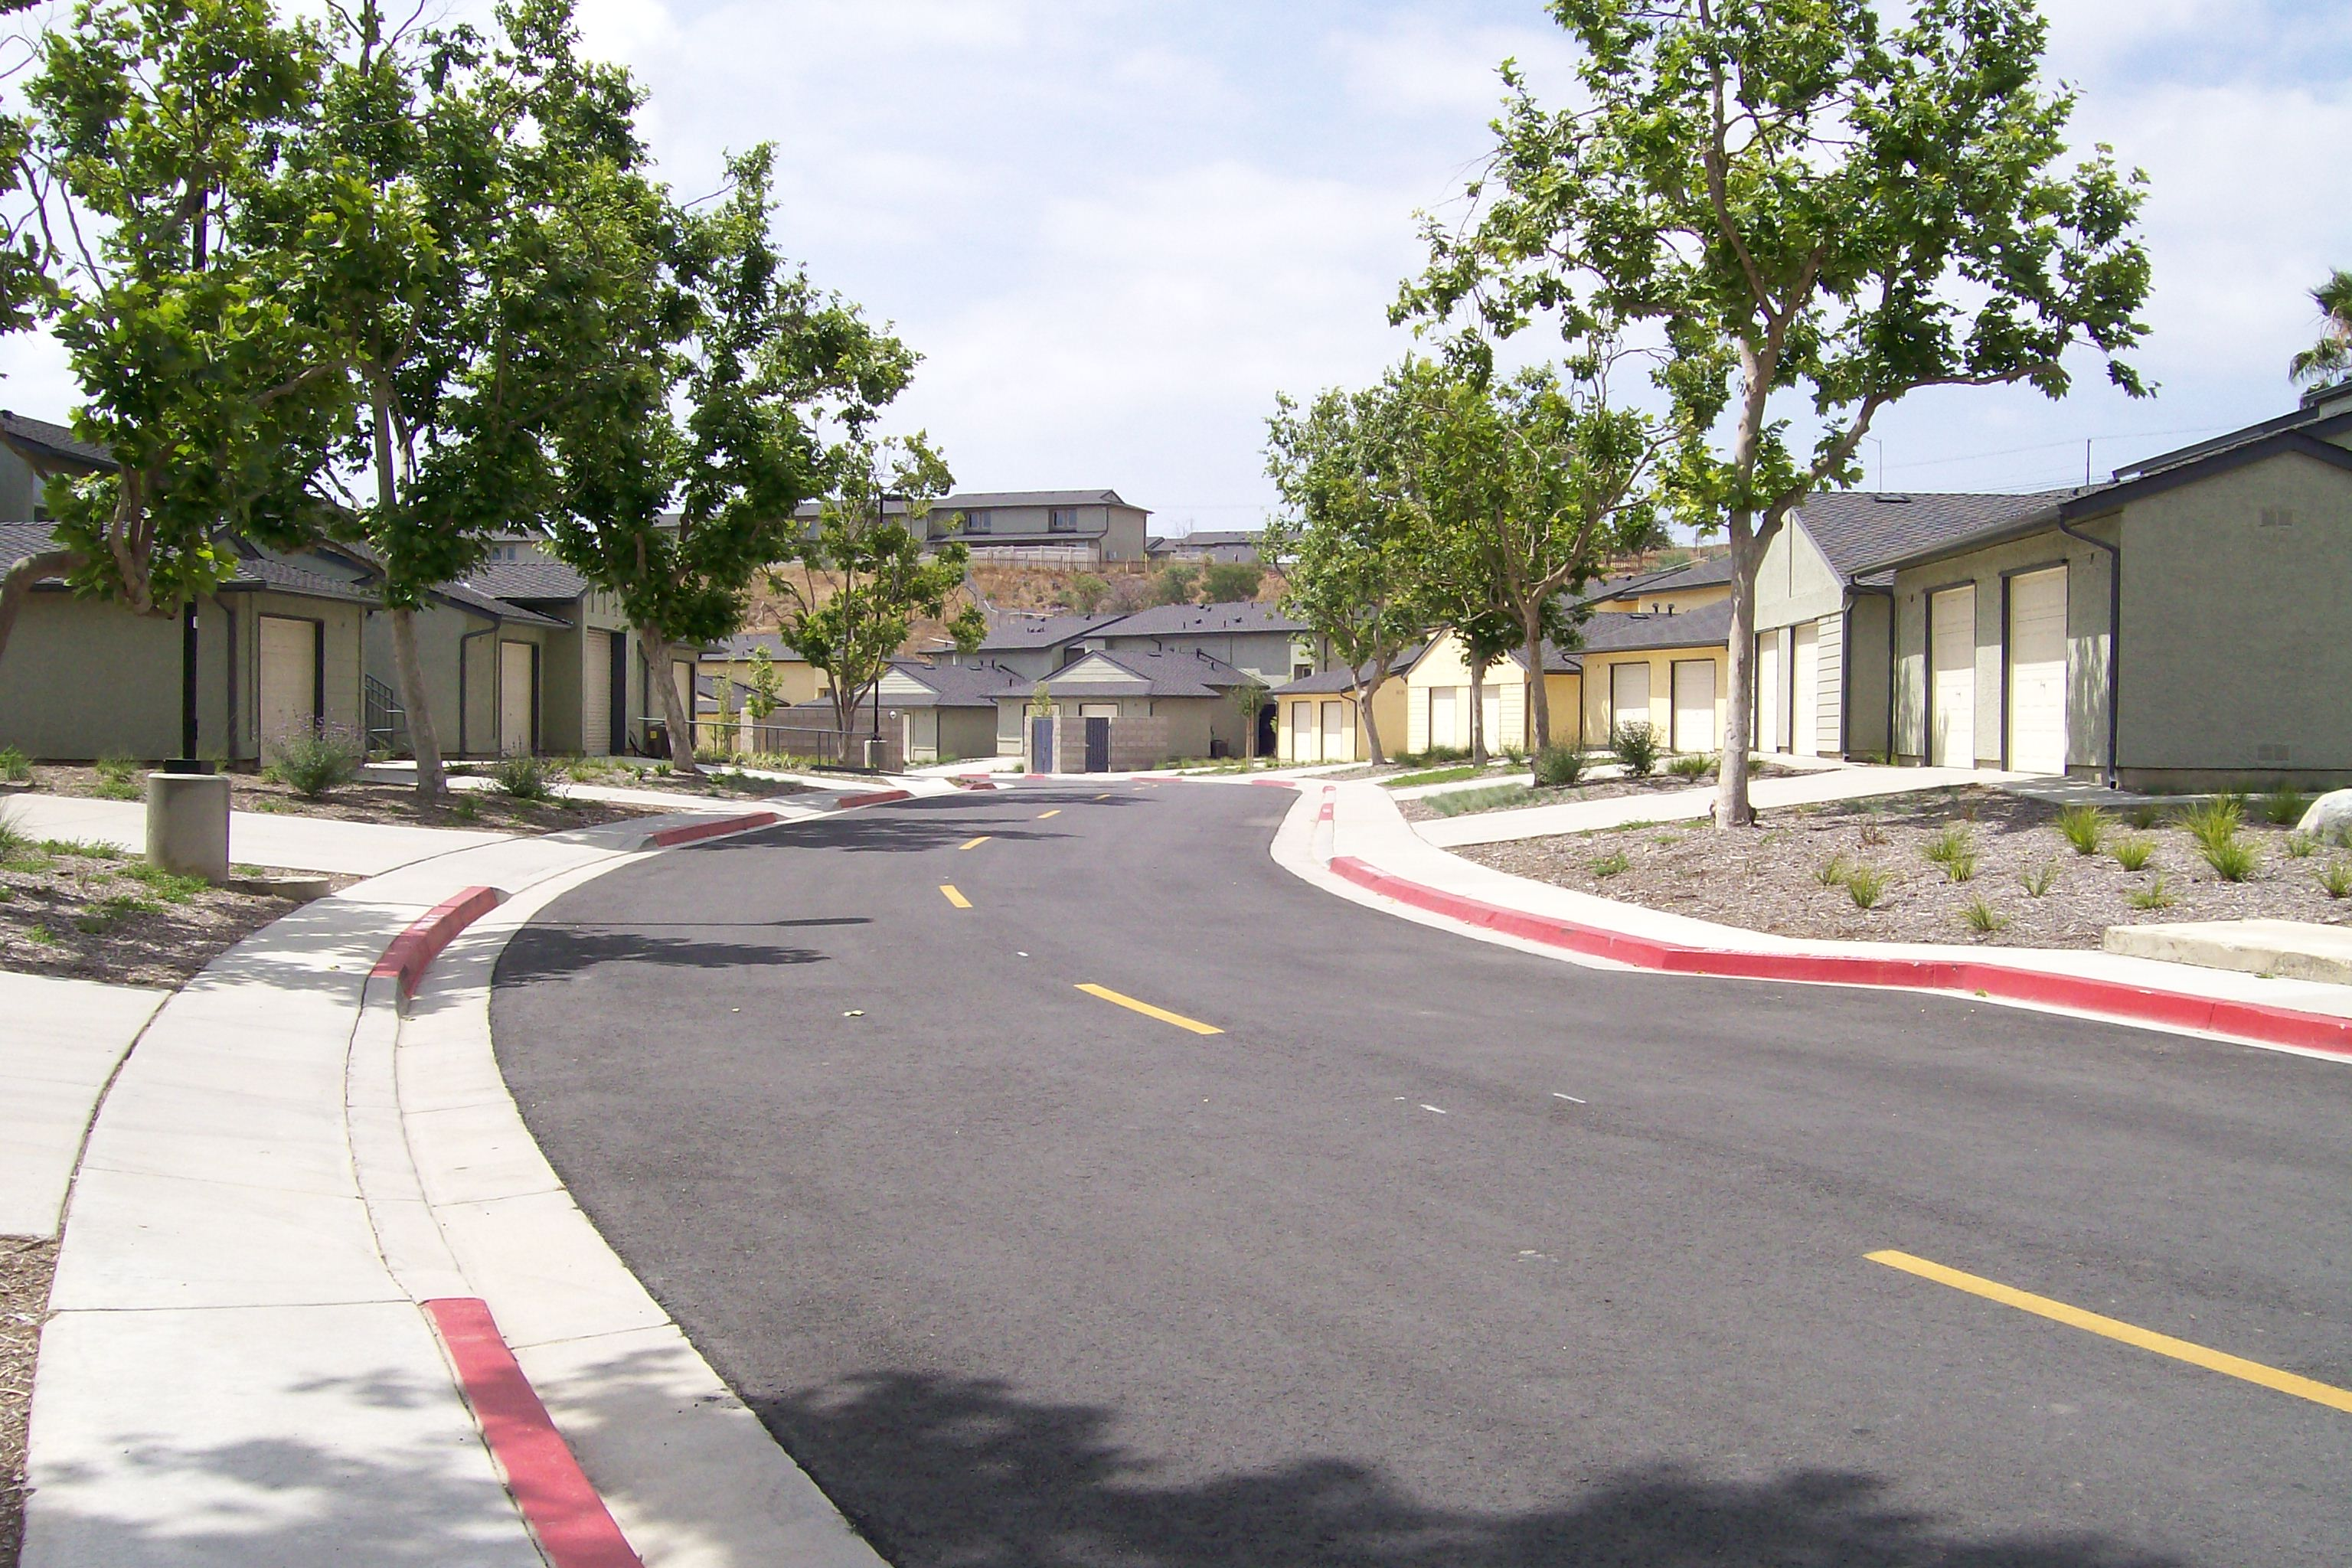 View of a curbed street with trees There are multiple houses, trees and pebble landscaping in front of the homes.